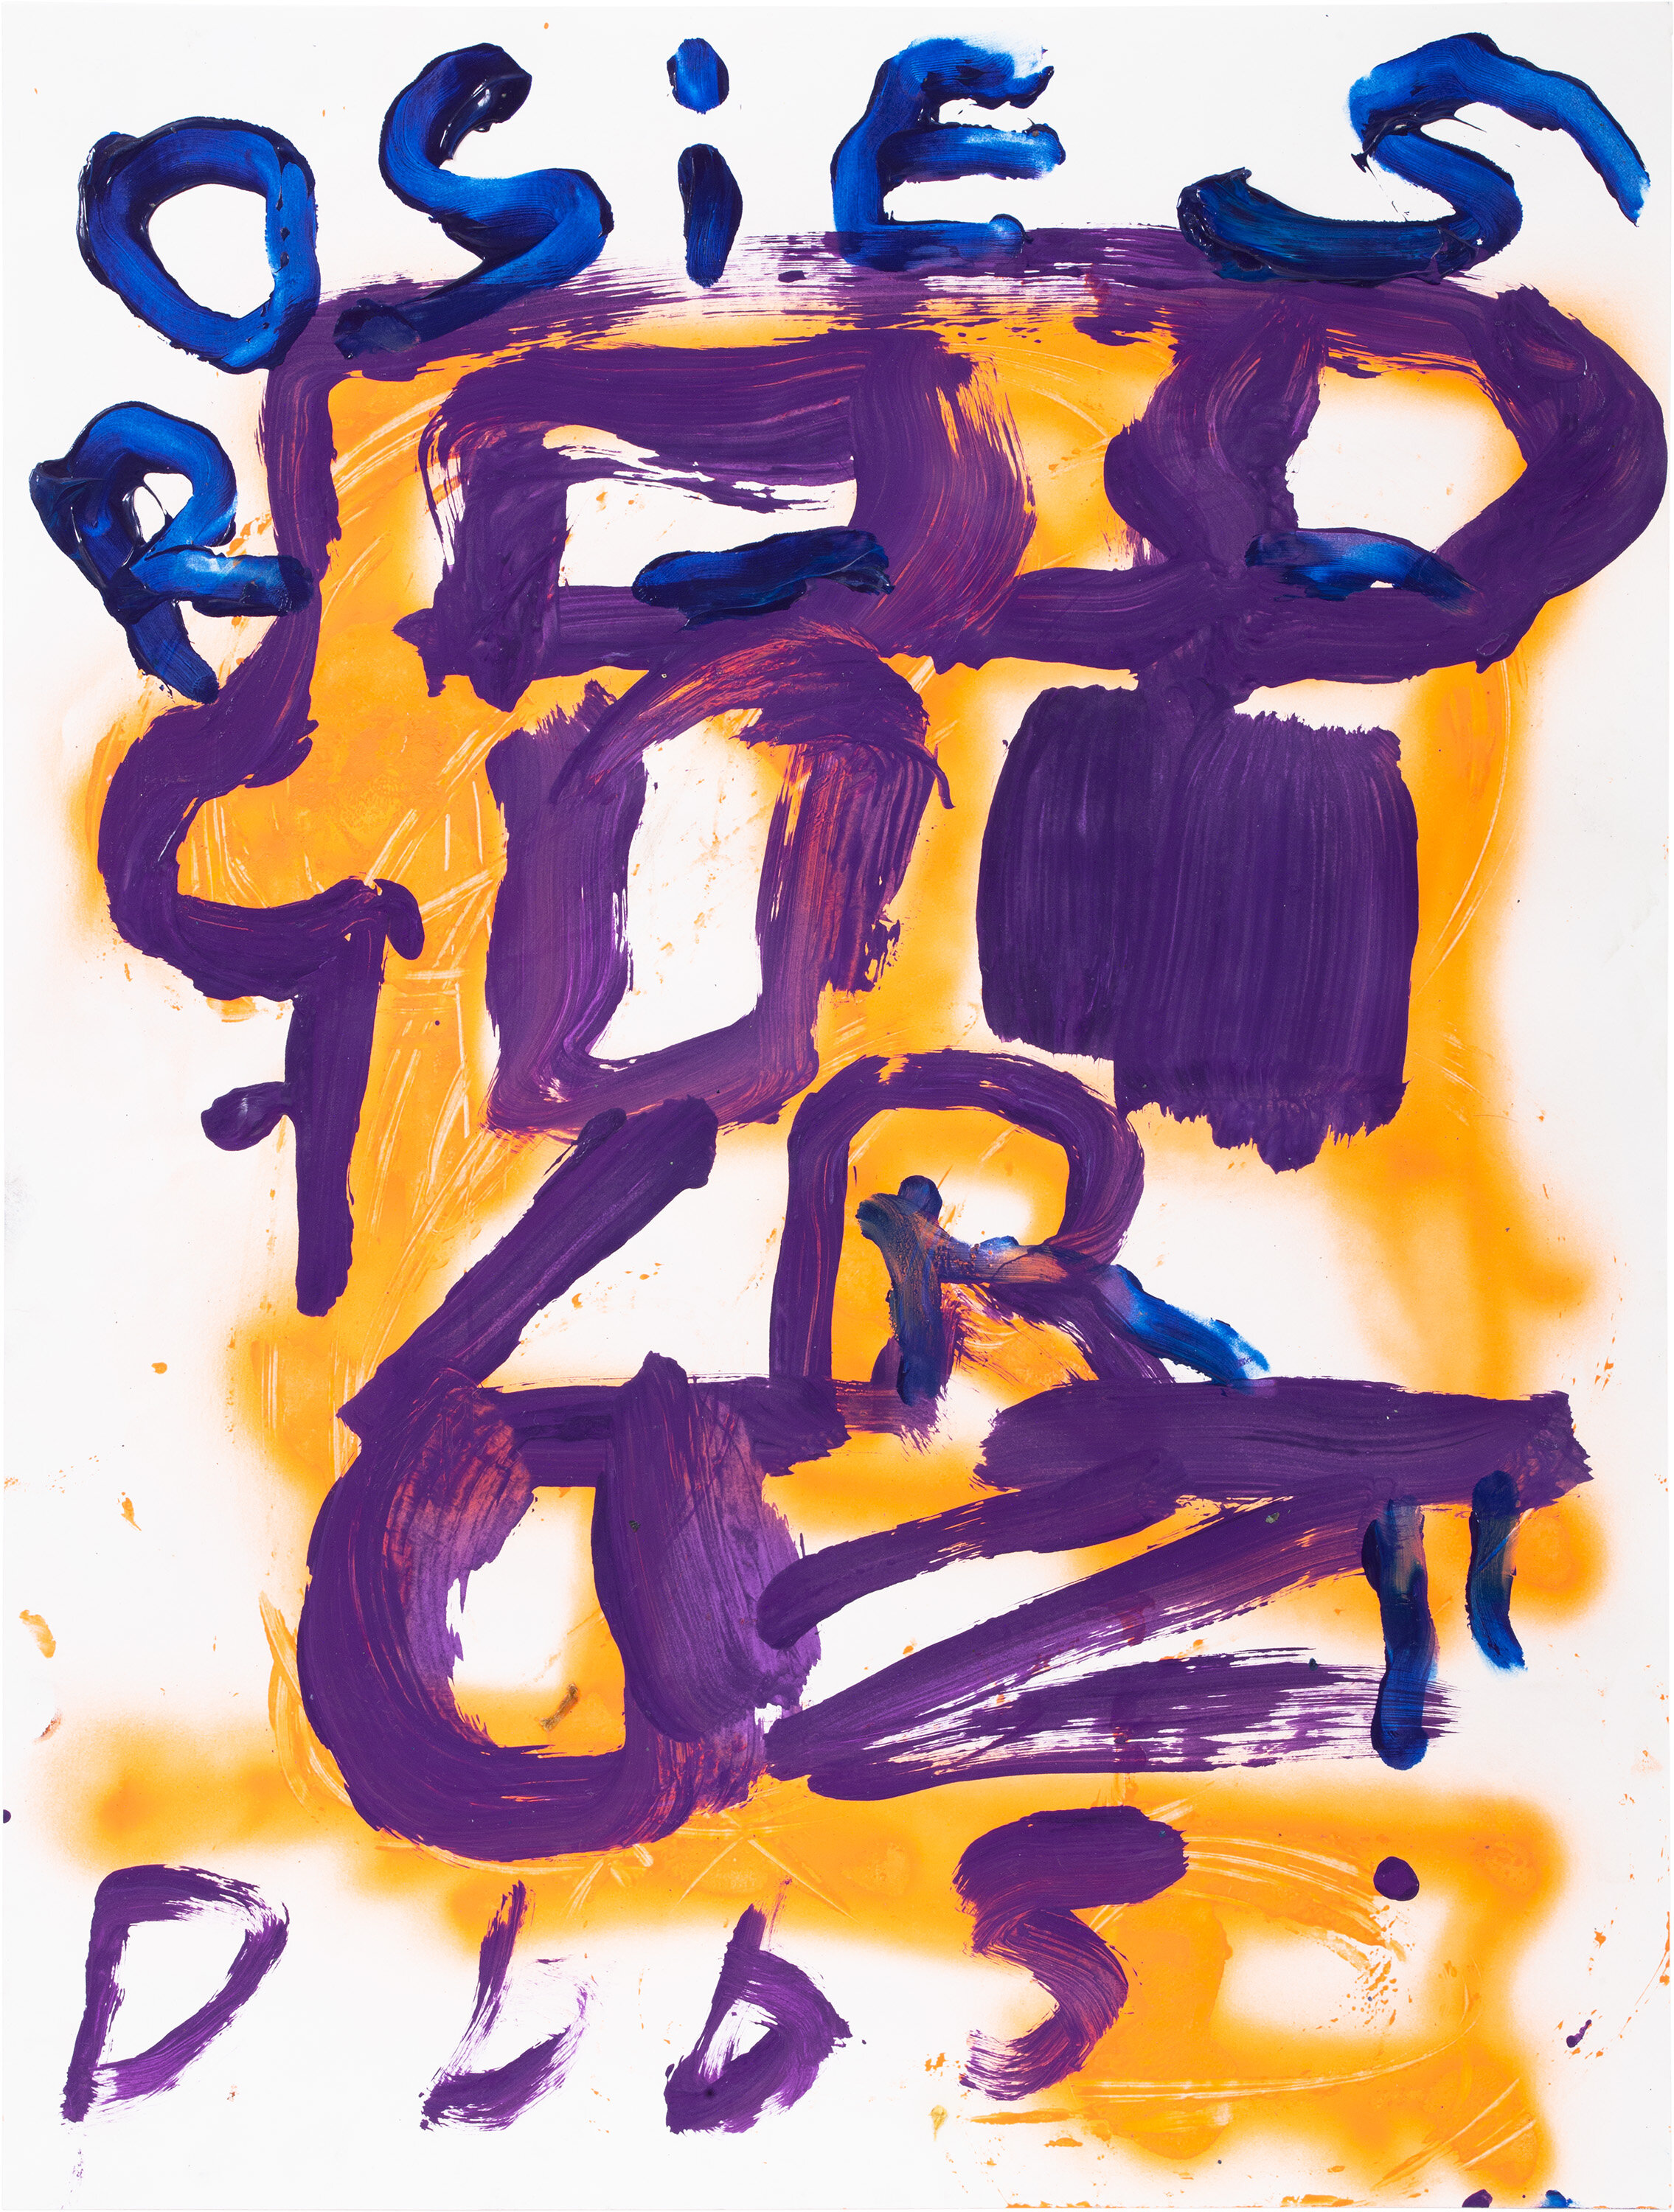  Drew Beattie and Ben Shepard   DBBS-DRW-2019-069   2019  acrylic and spray paint on paper  24 x 18 inches 